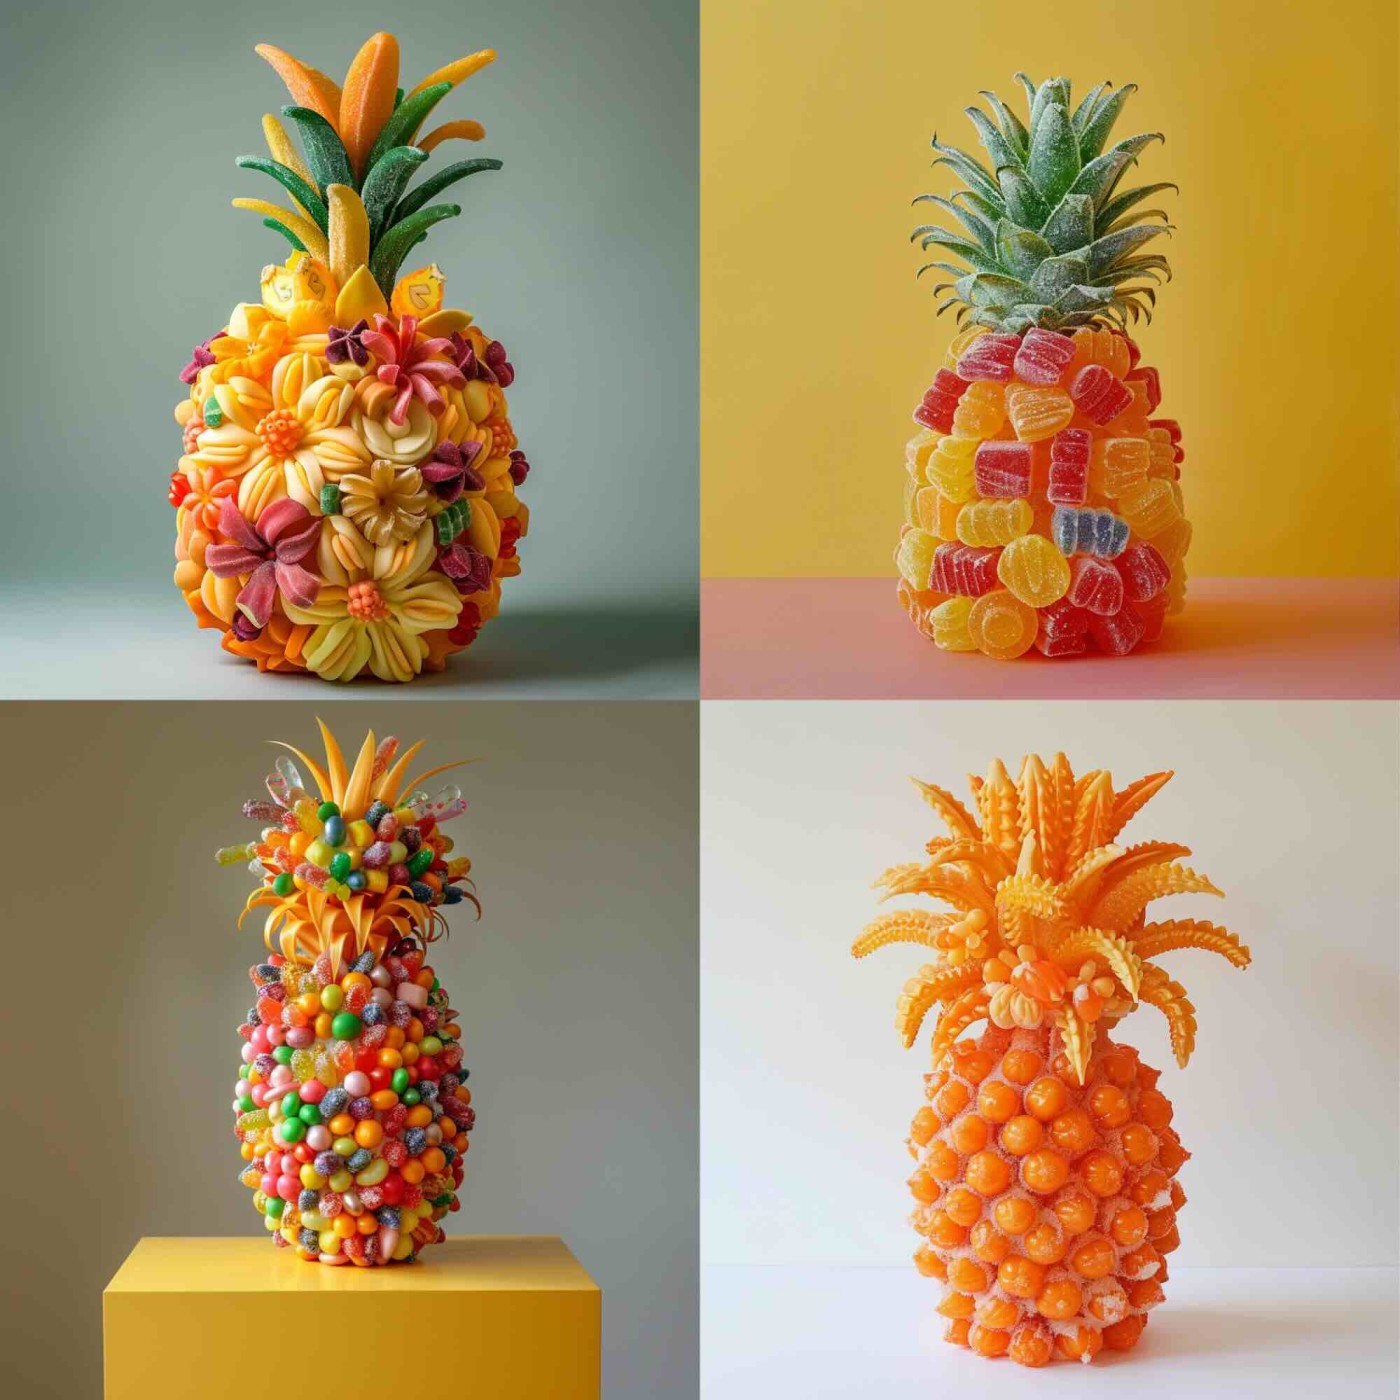 A pineapple made of candy